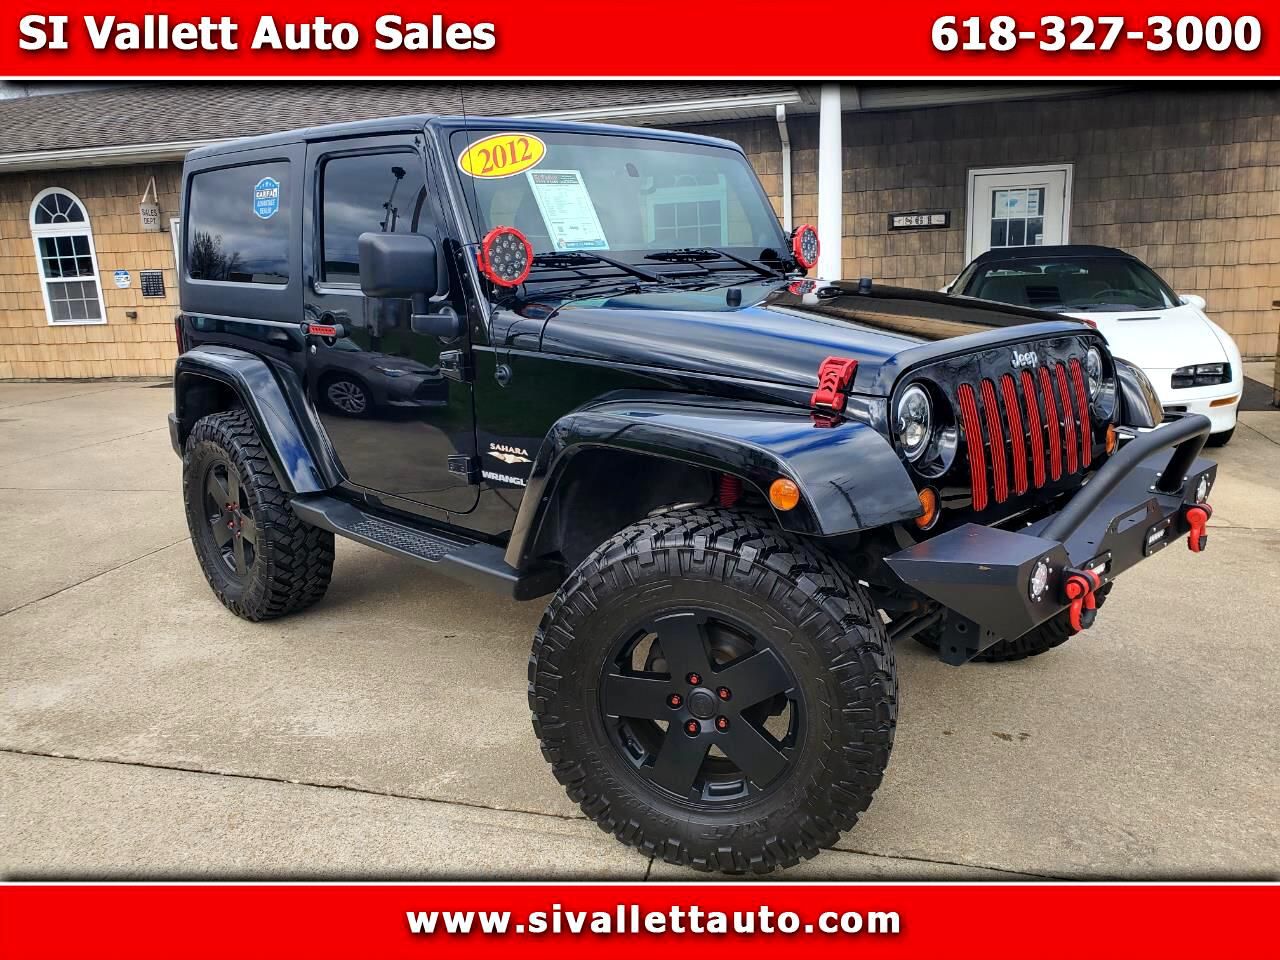 2012 Jeep Wrangler for Sale in Nashville, IL - OfferUp